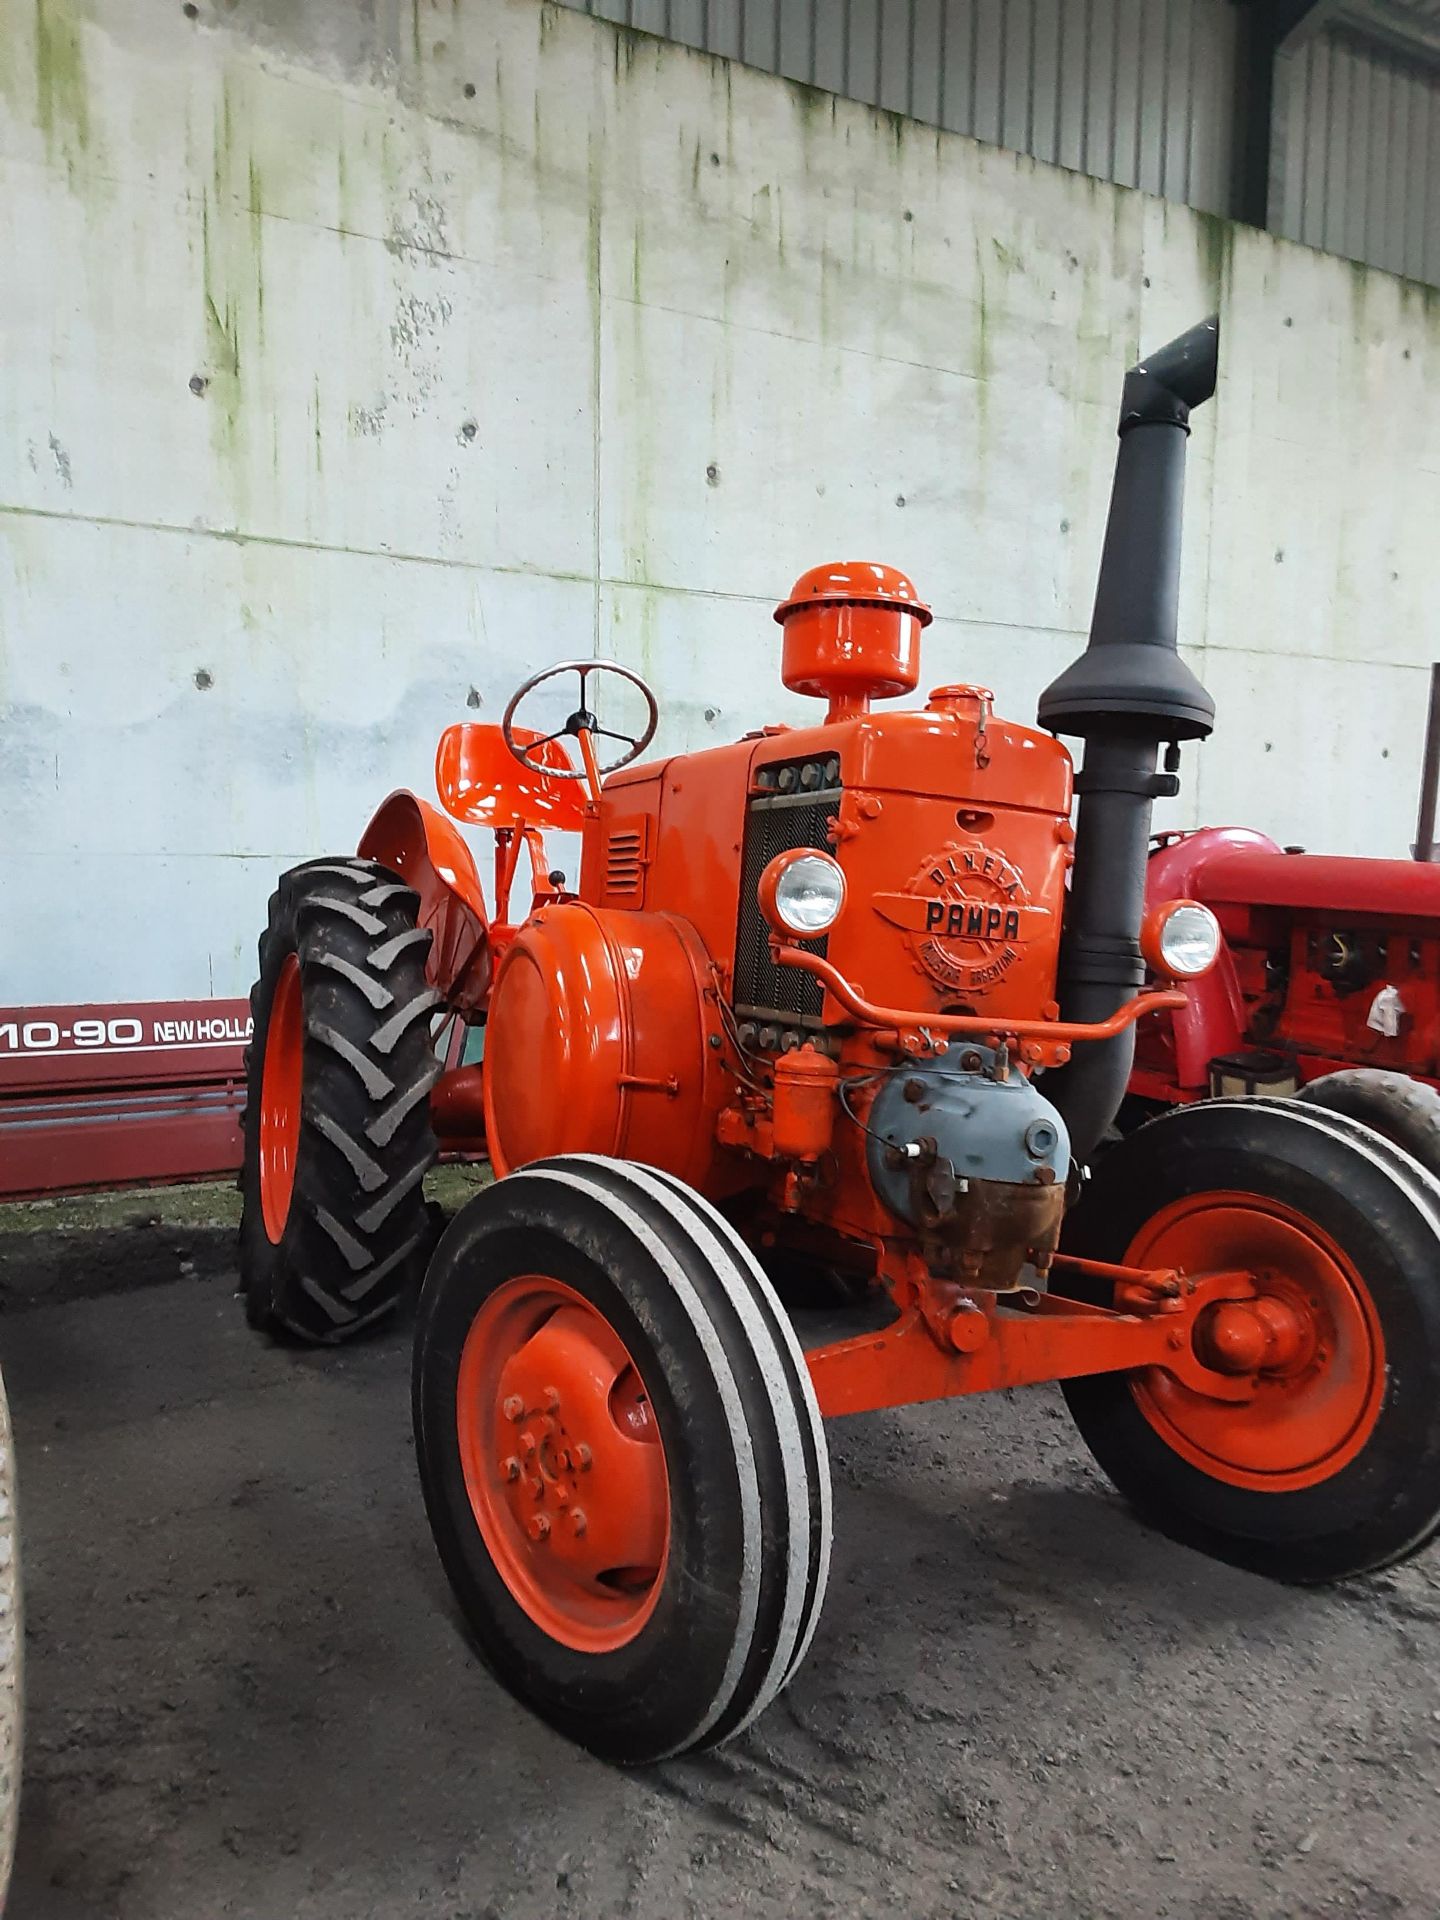 VINTAGE TRACTOR DINFIO PAMPA - Image 23 of 29